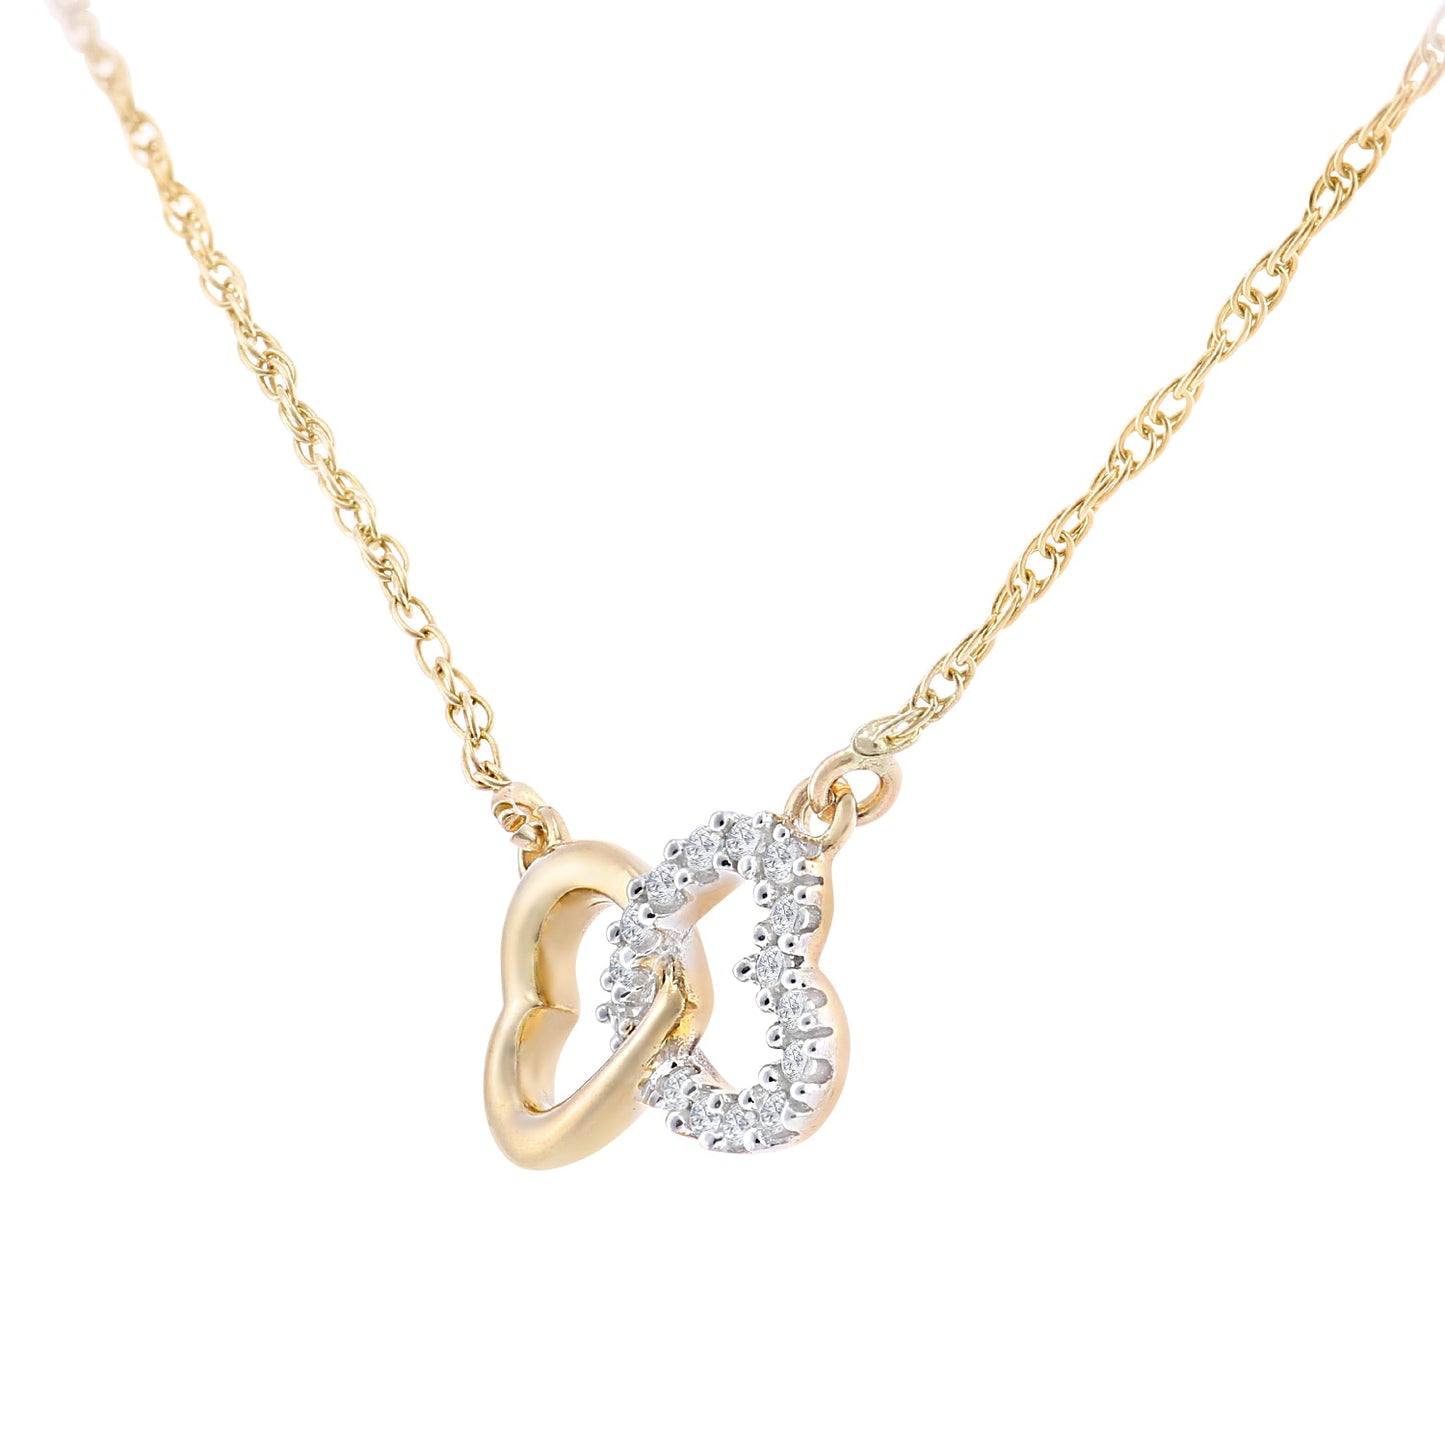 9ct Gold  Round 7pts Diamond Heart Infinity Charm Necklace 18 inch - PP0AXL5969Y